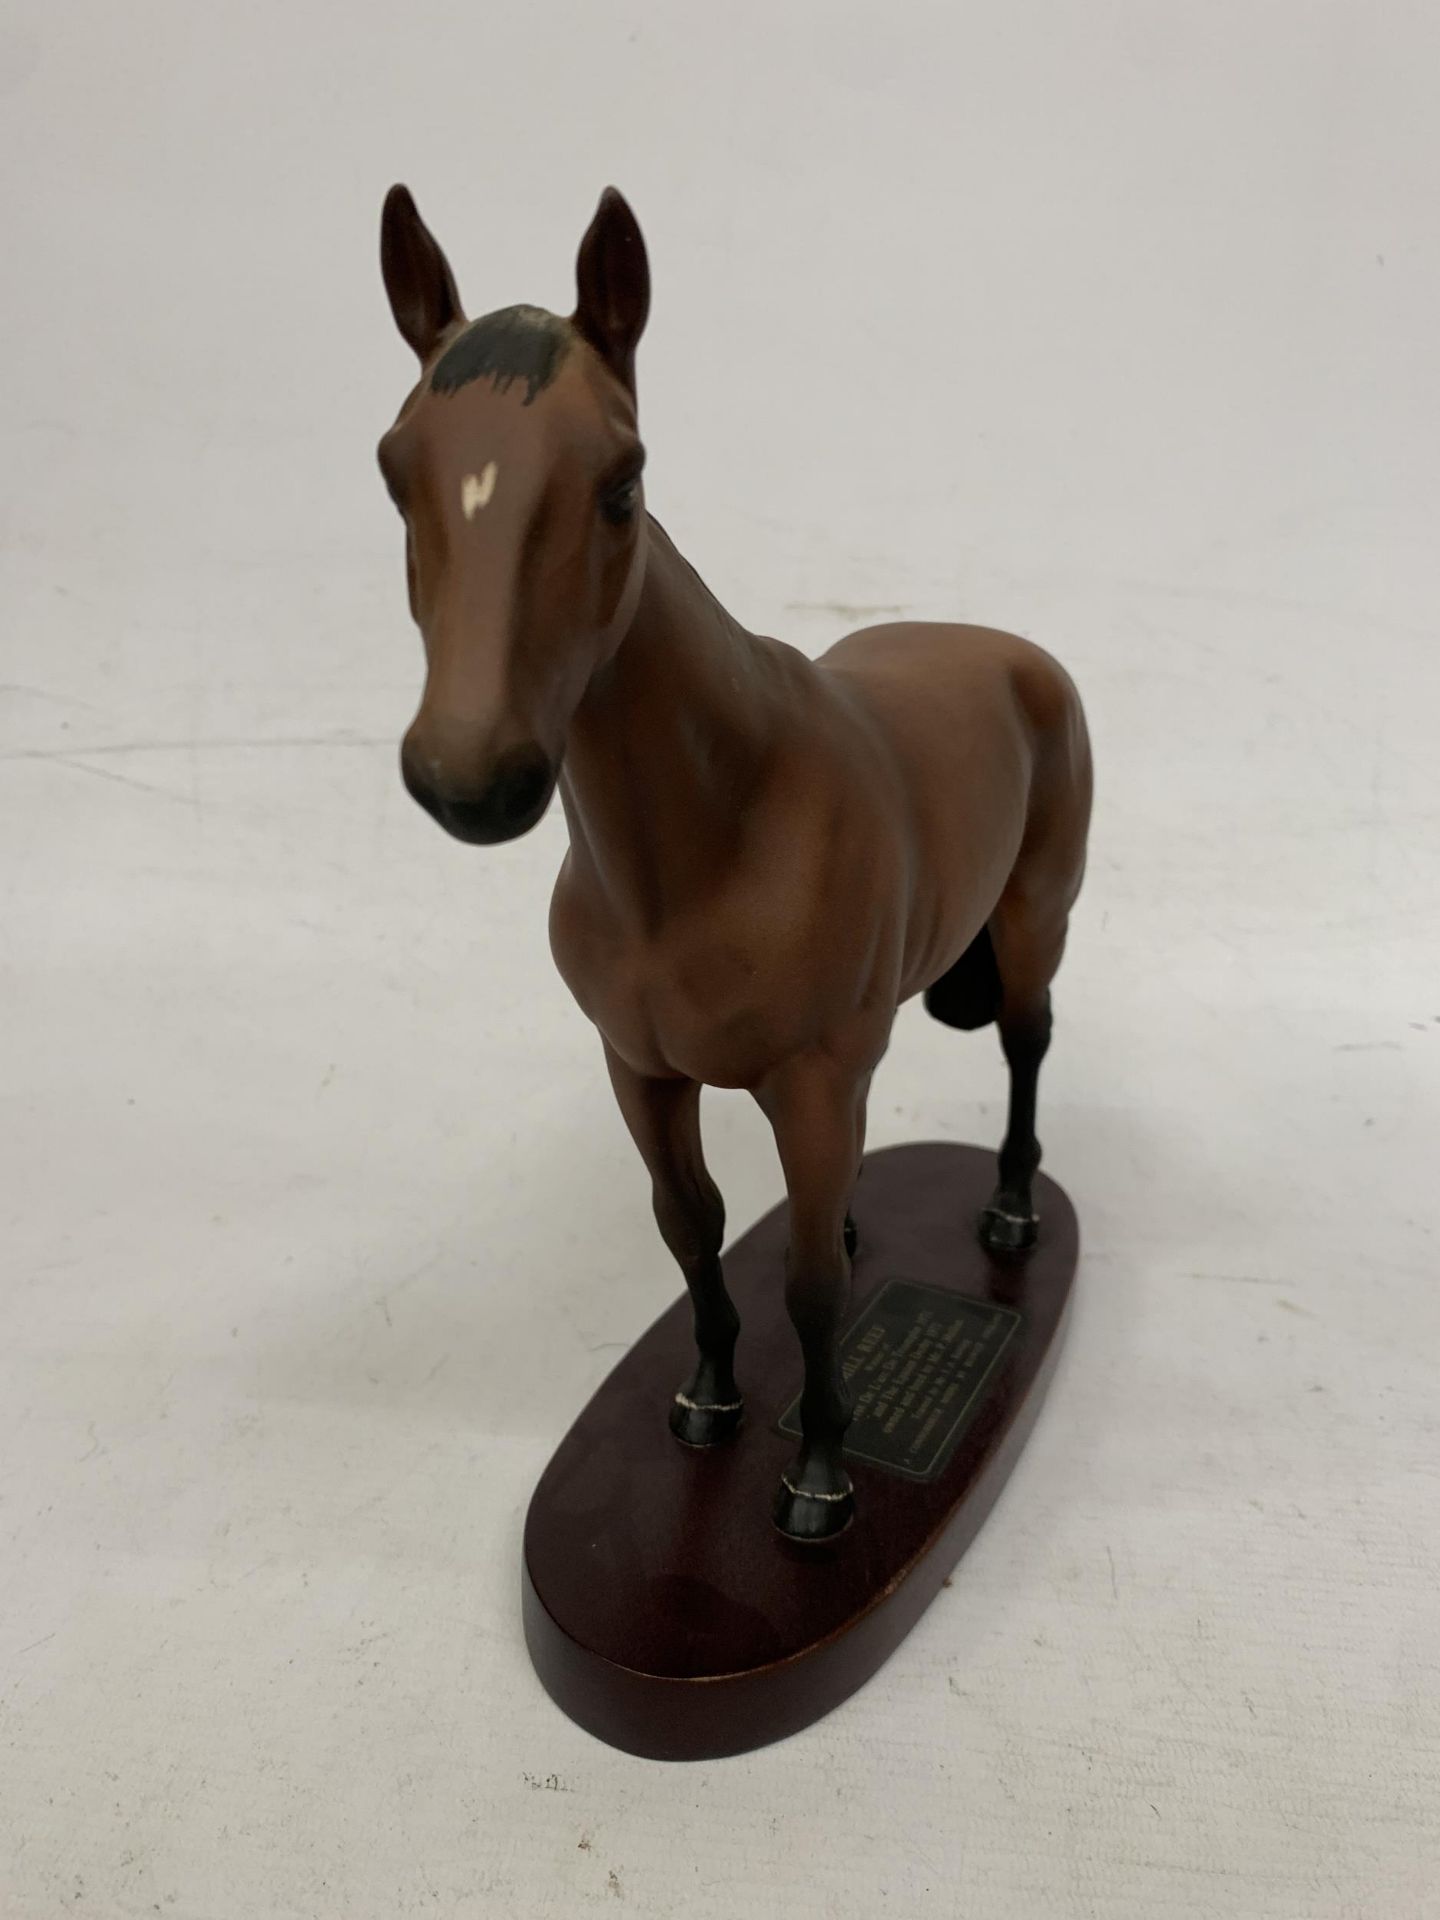 A BESWICK "MILL REEF" HORSE ON WOODEN PLINTH - Image 2 of 5